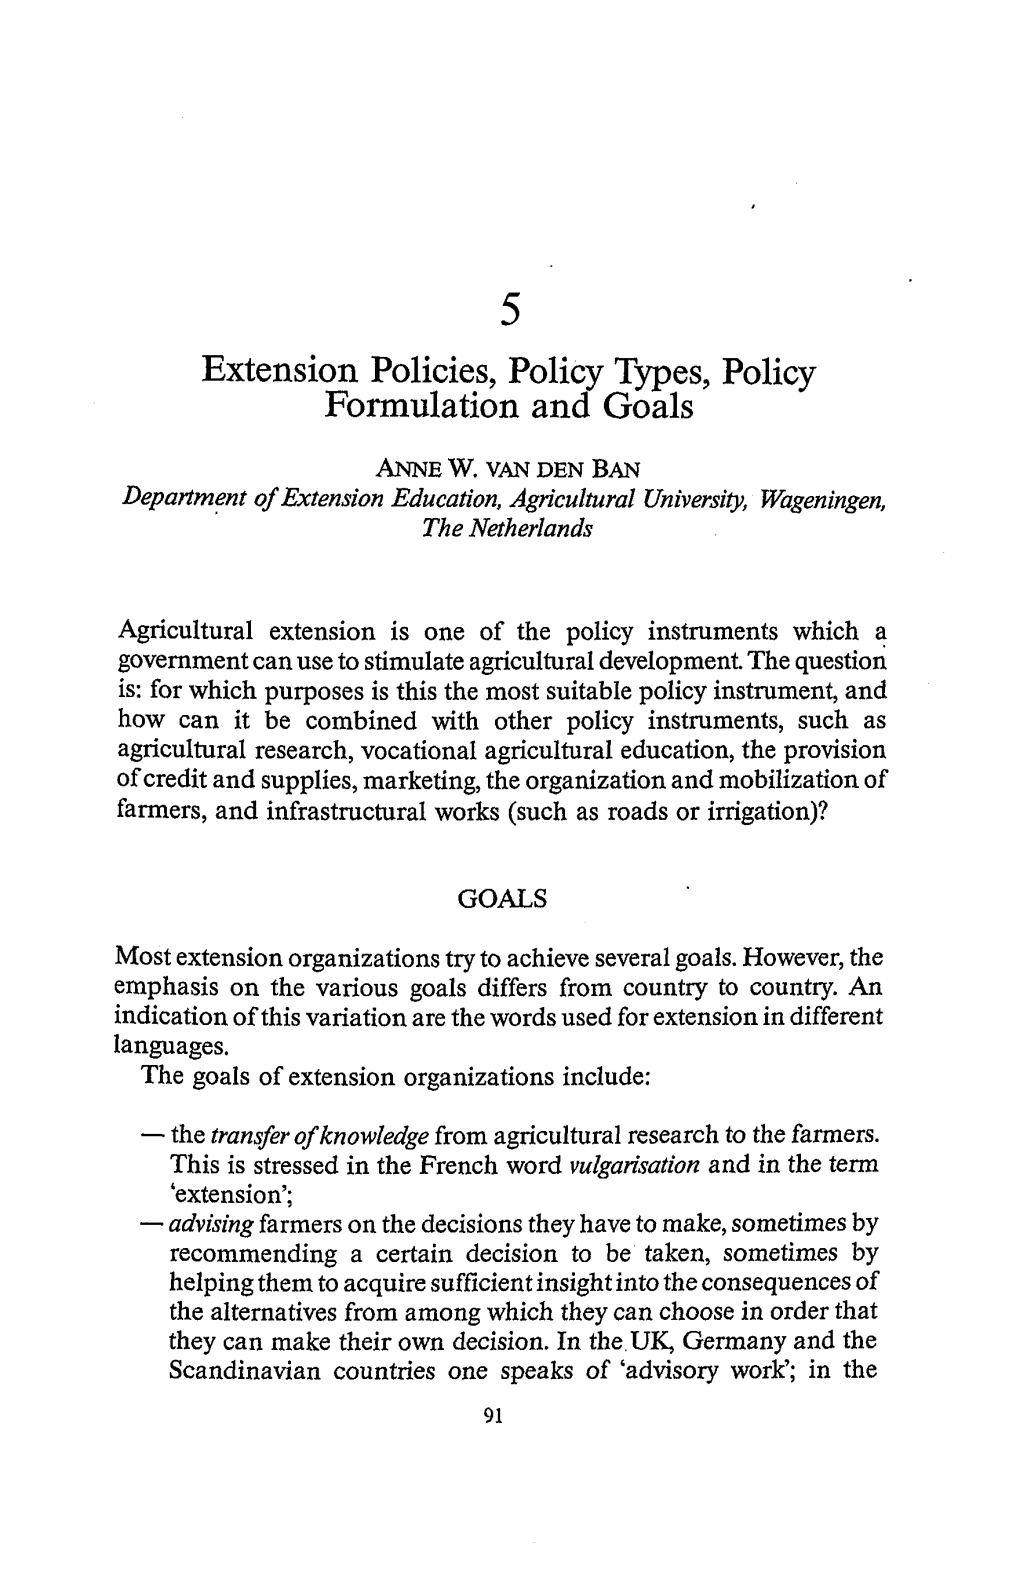 Extension Policies, Policy Types, Policy Formulation and Goals